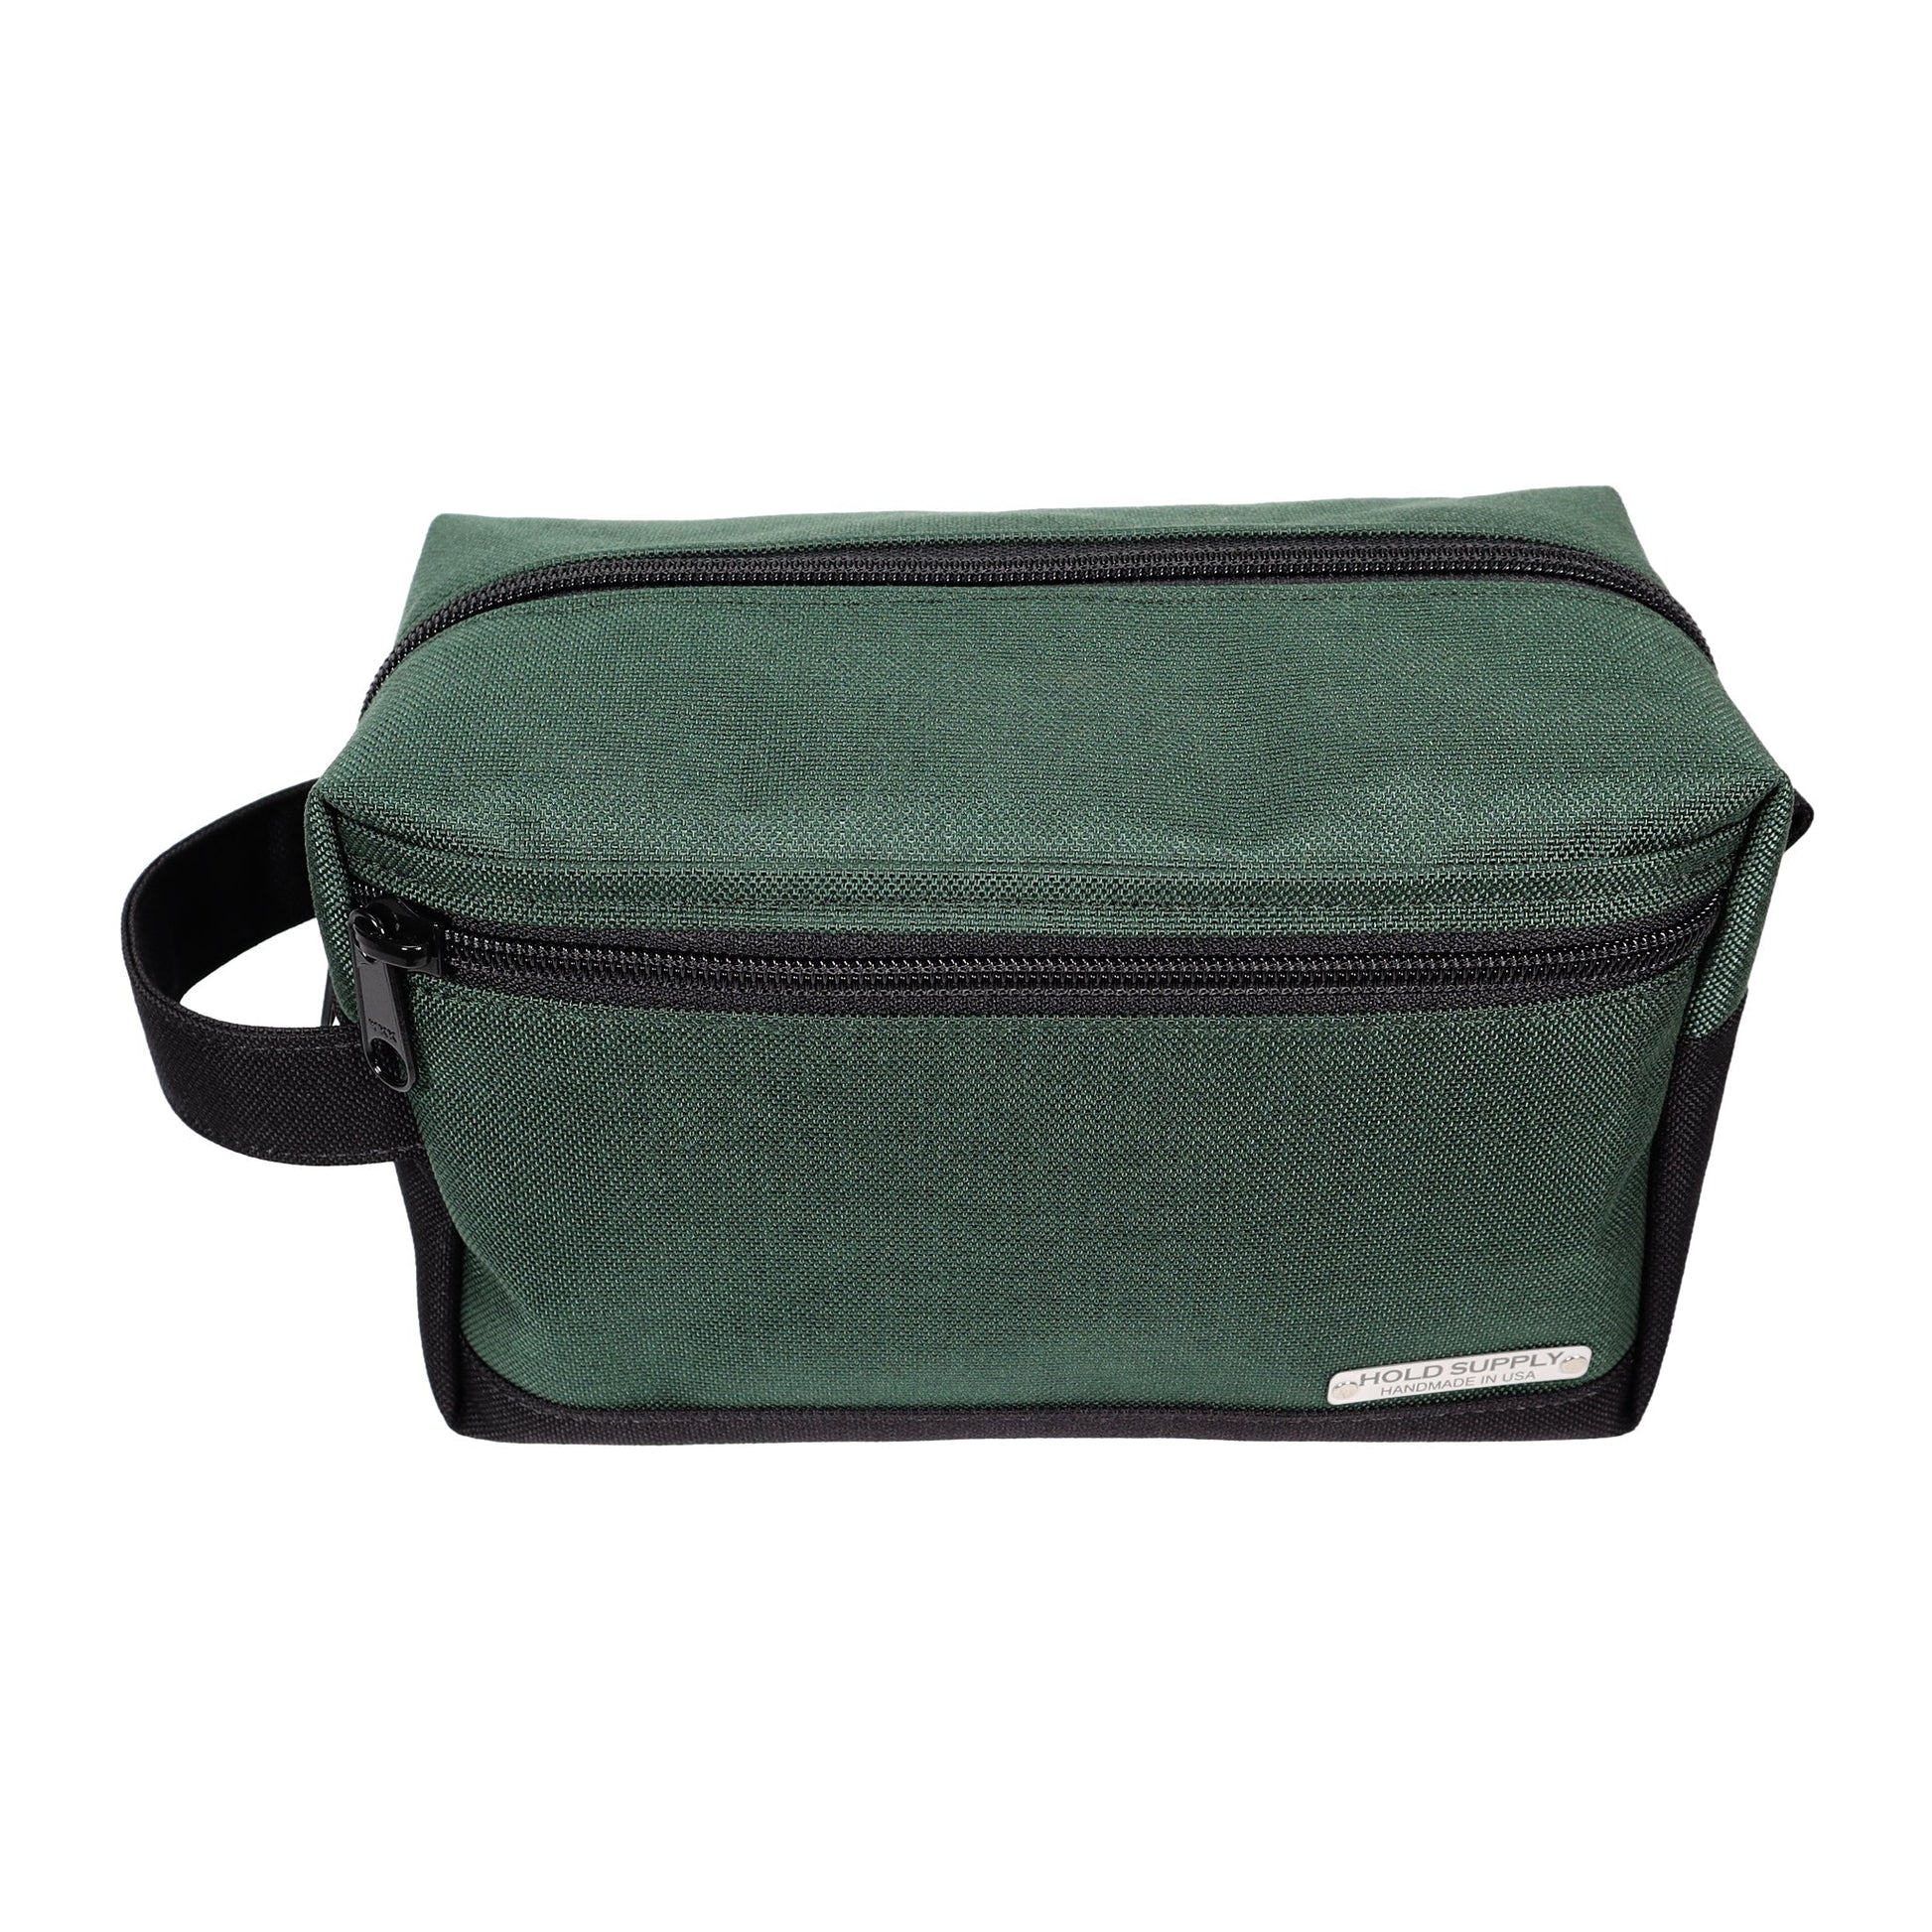 Green and Black Tall Canvas Toiletry Bag